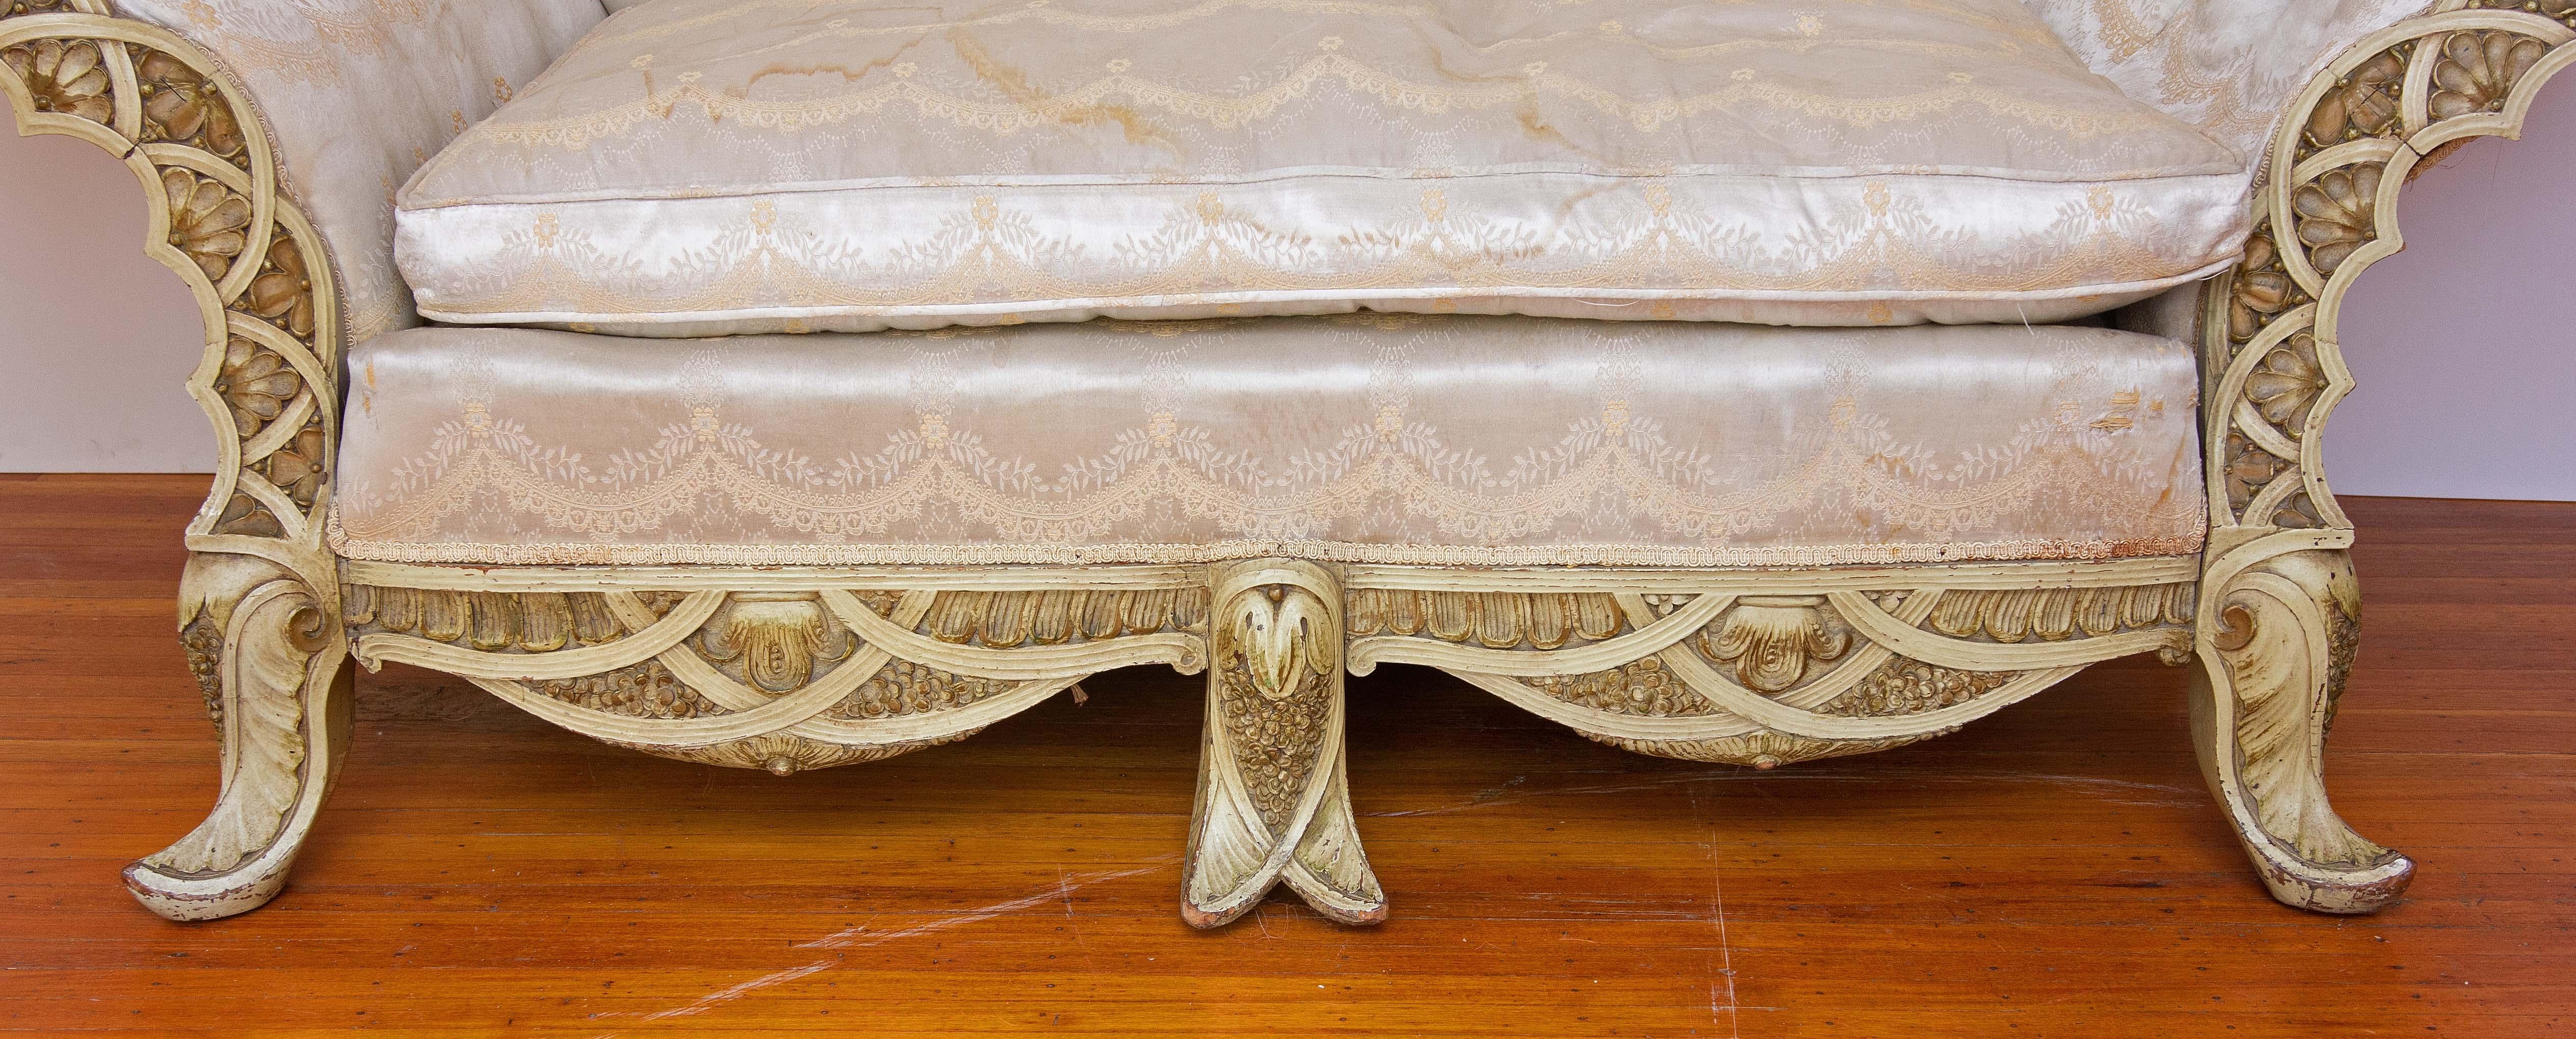 Venetian Fantasy Carved and Painted Sofa  In Fair Condition For Sale In Rochester, NY